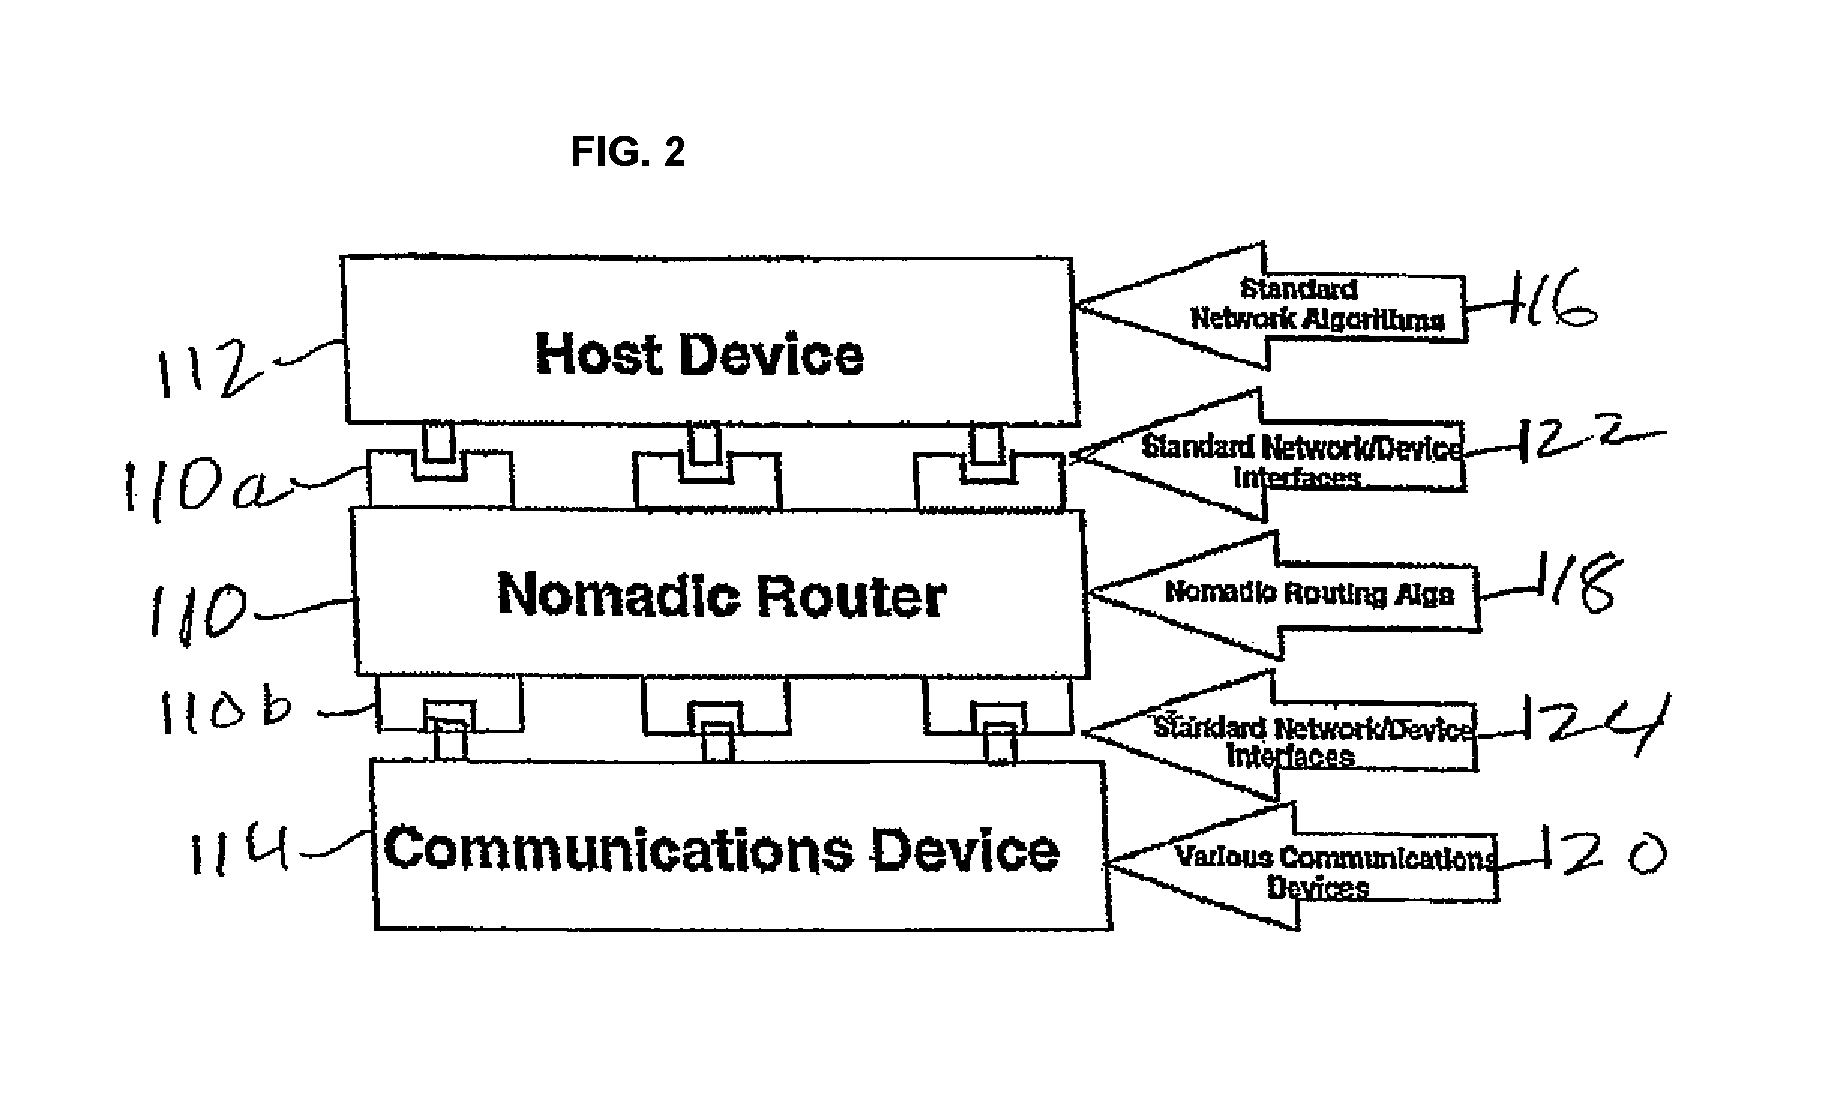 Systems and methods for authorizing, authenticating and accounting users having transparent computer access to a network using a gateway device